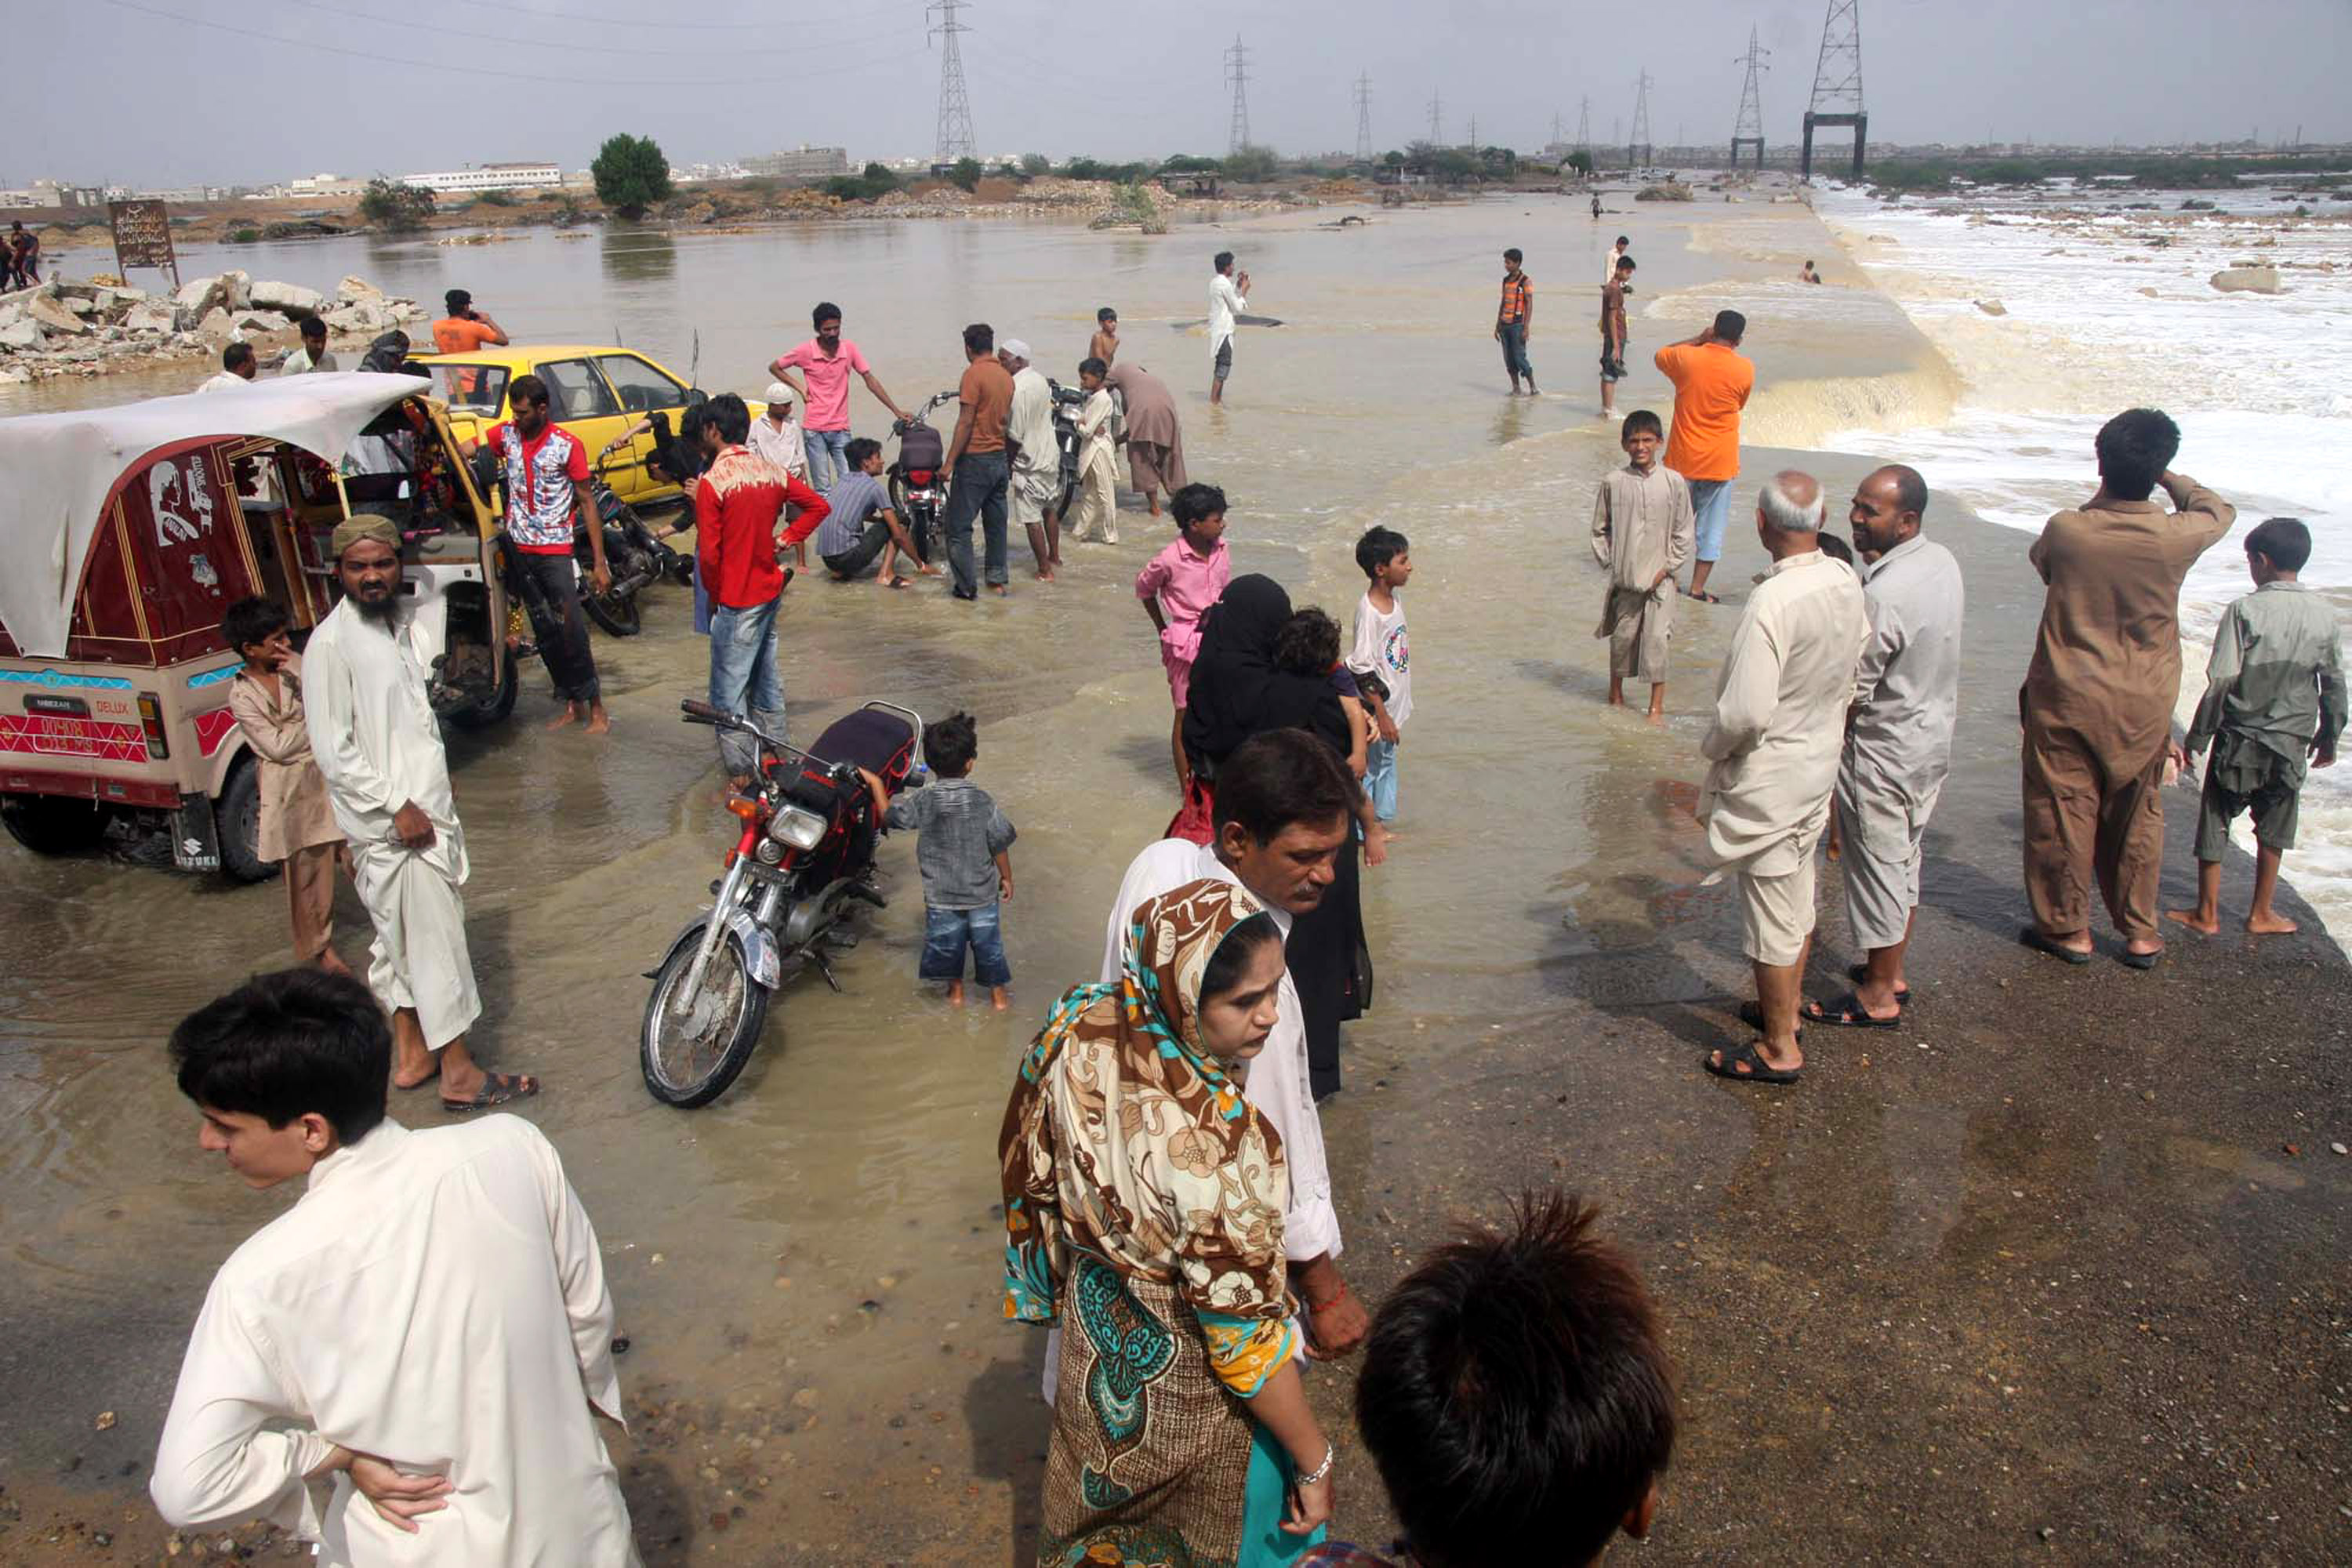 People wade through flooded road caused by heavy rains on the outskirts of Karachi. Photo: Xinhua